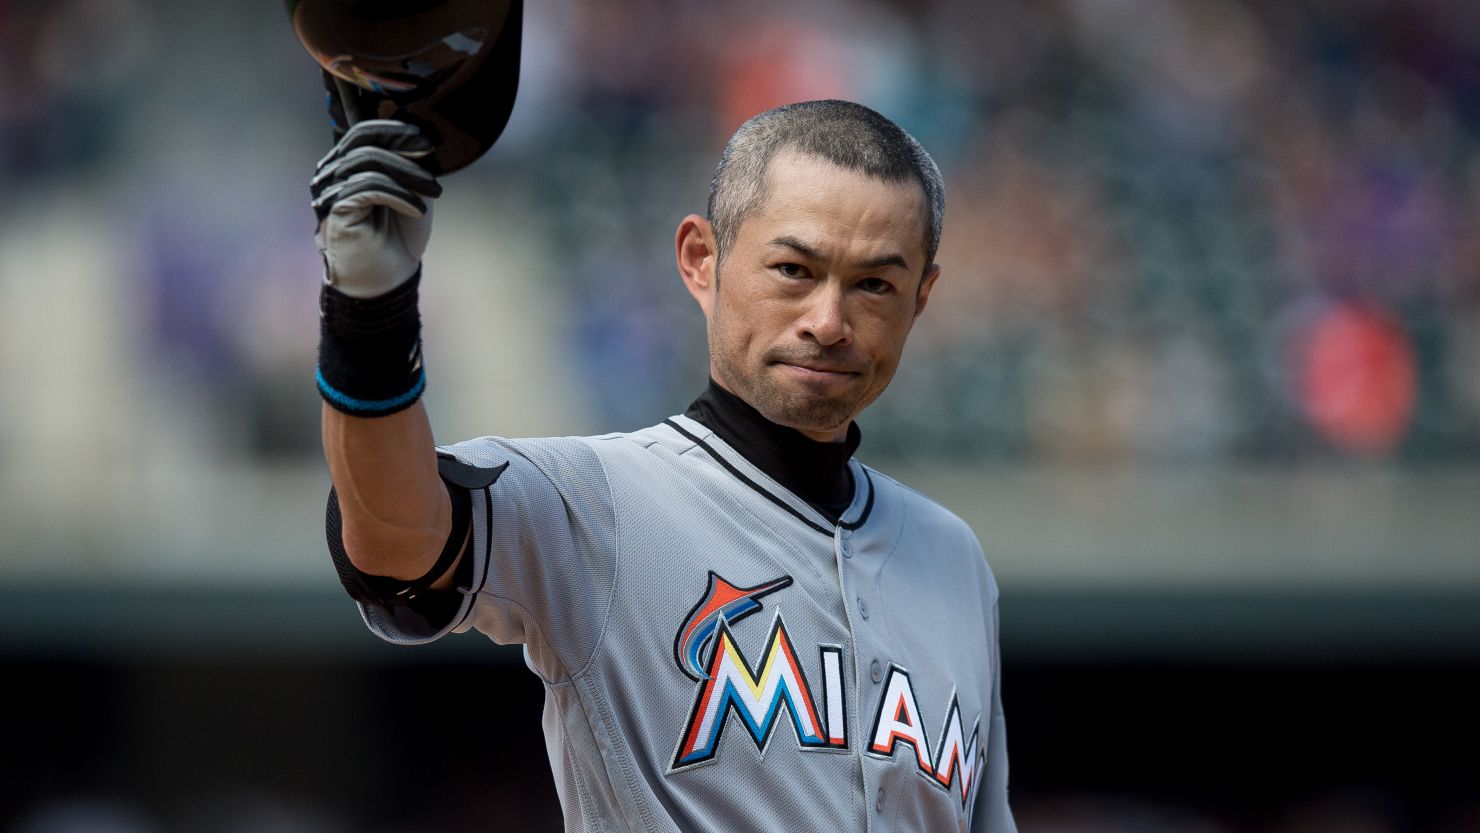 Ichiro Suzuki of the Miami Marlins tips his hat to the crowd after hitting a seventh inning triple against the Colorado Rockies for the 3,000th hit of his MLB career.